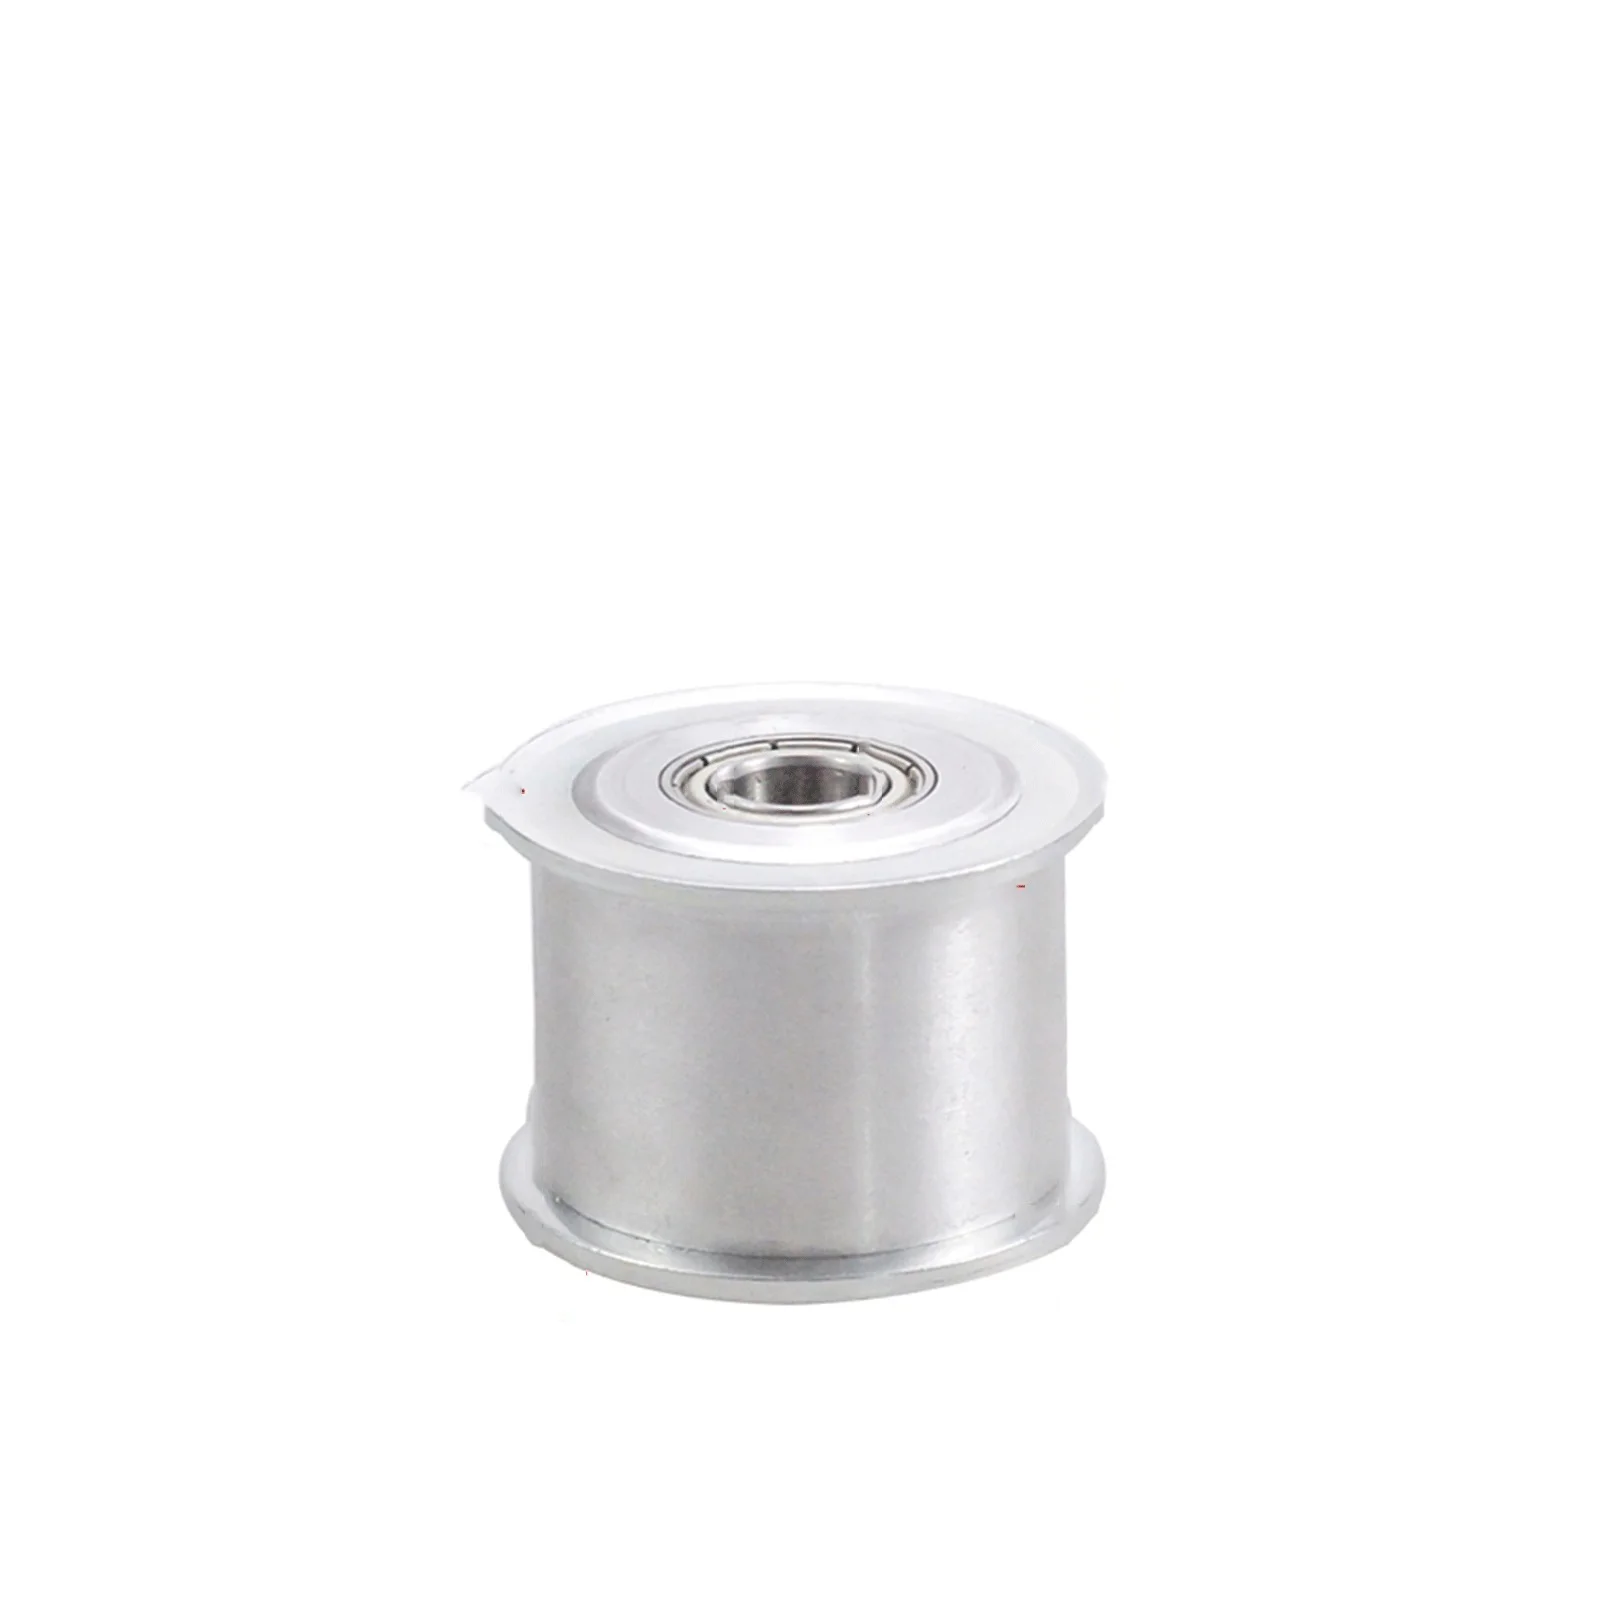 

12 Teeth 5M Idler Pulley Tensioner Wheel 12T, Bore 3/4/5/6mm, With Bearing Guide, 5M Synchronous Pulley HTD5M 12teeth 12T, 1pcs